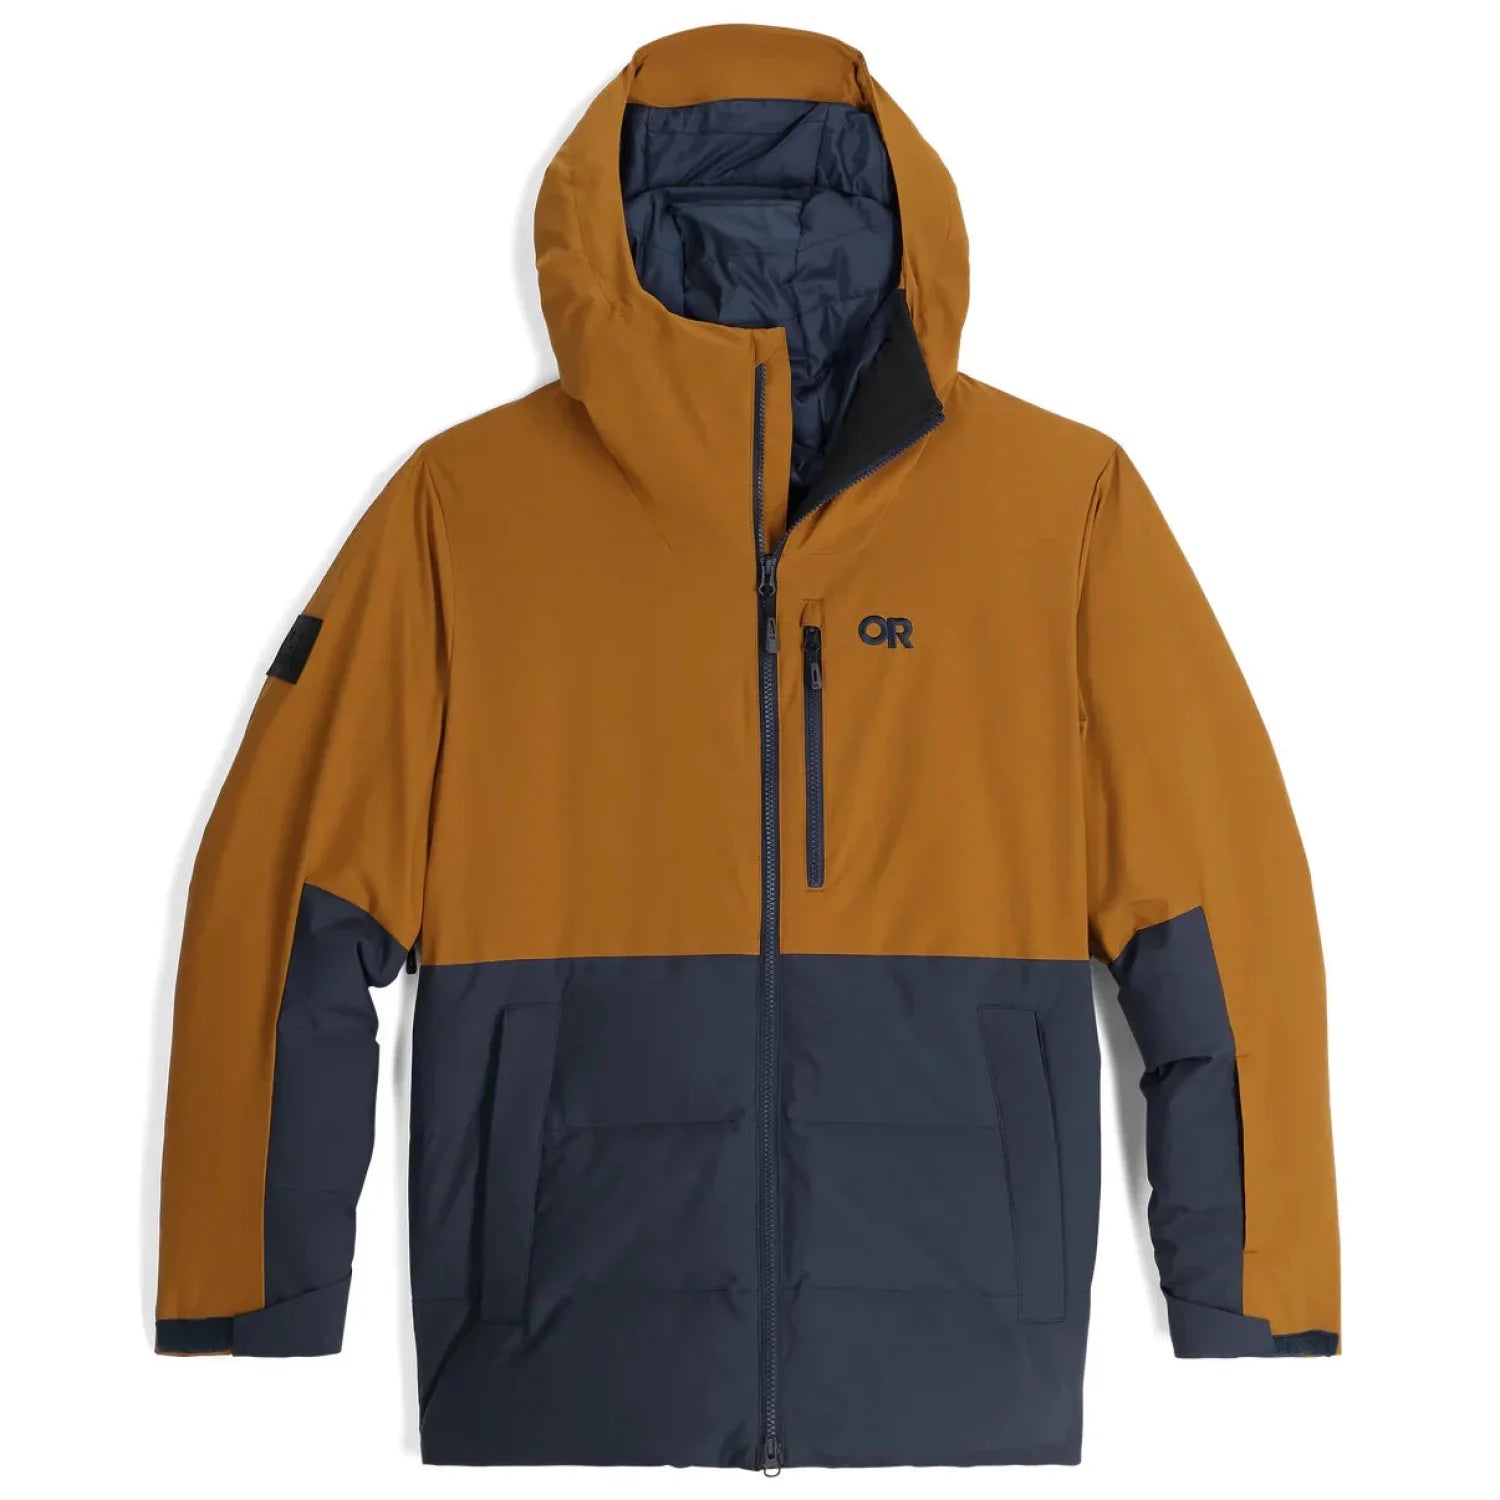 Outdoor Research Men's Snowcrew Down Jacket in Bronze and Naval Blue block coloring with OR logo and a vertical zipper on the upper left side of the jacket. Flat View.